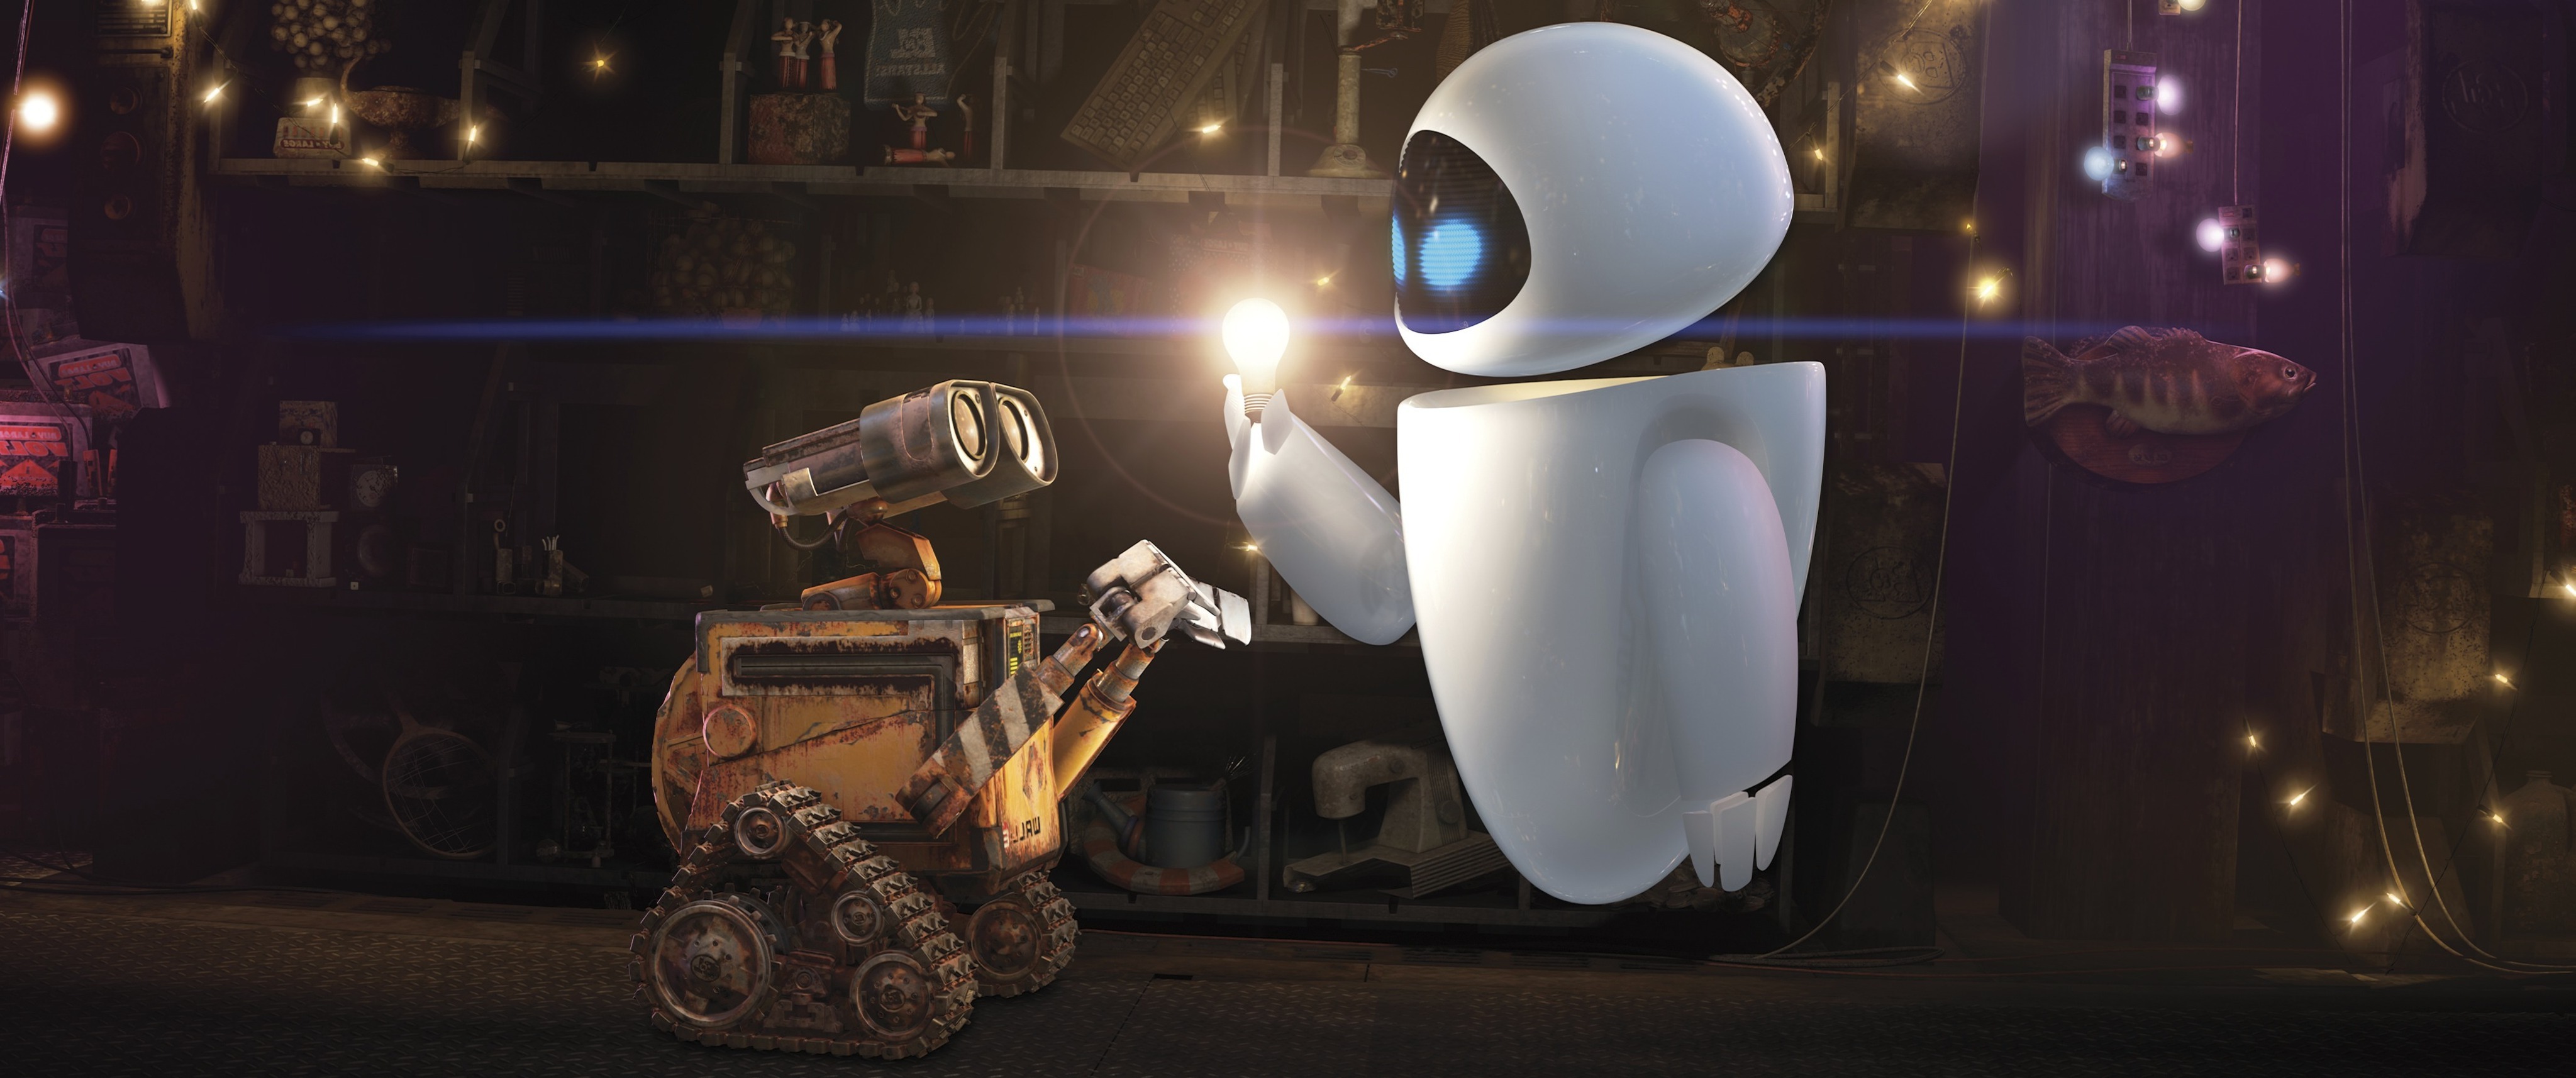 Free Download Wall E Full Movie Hd